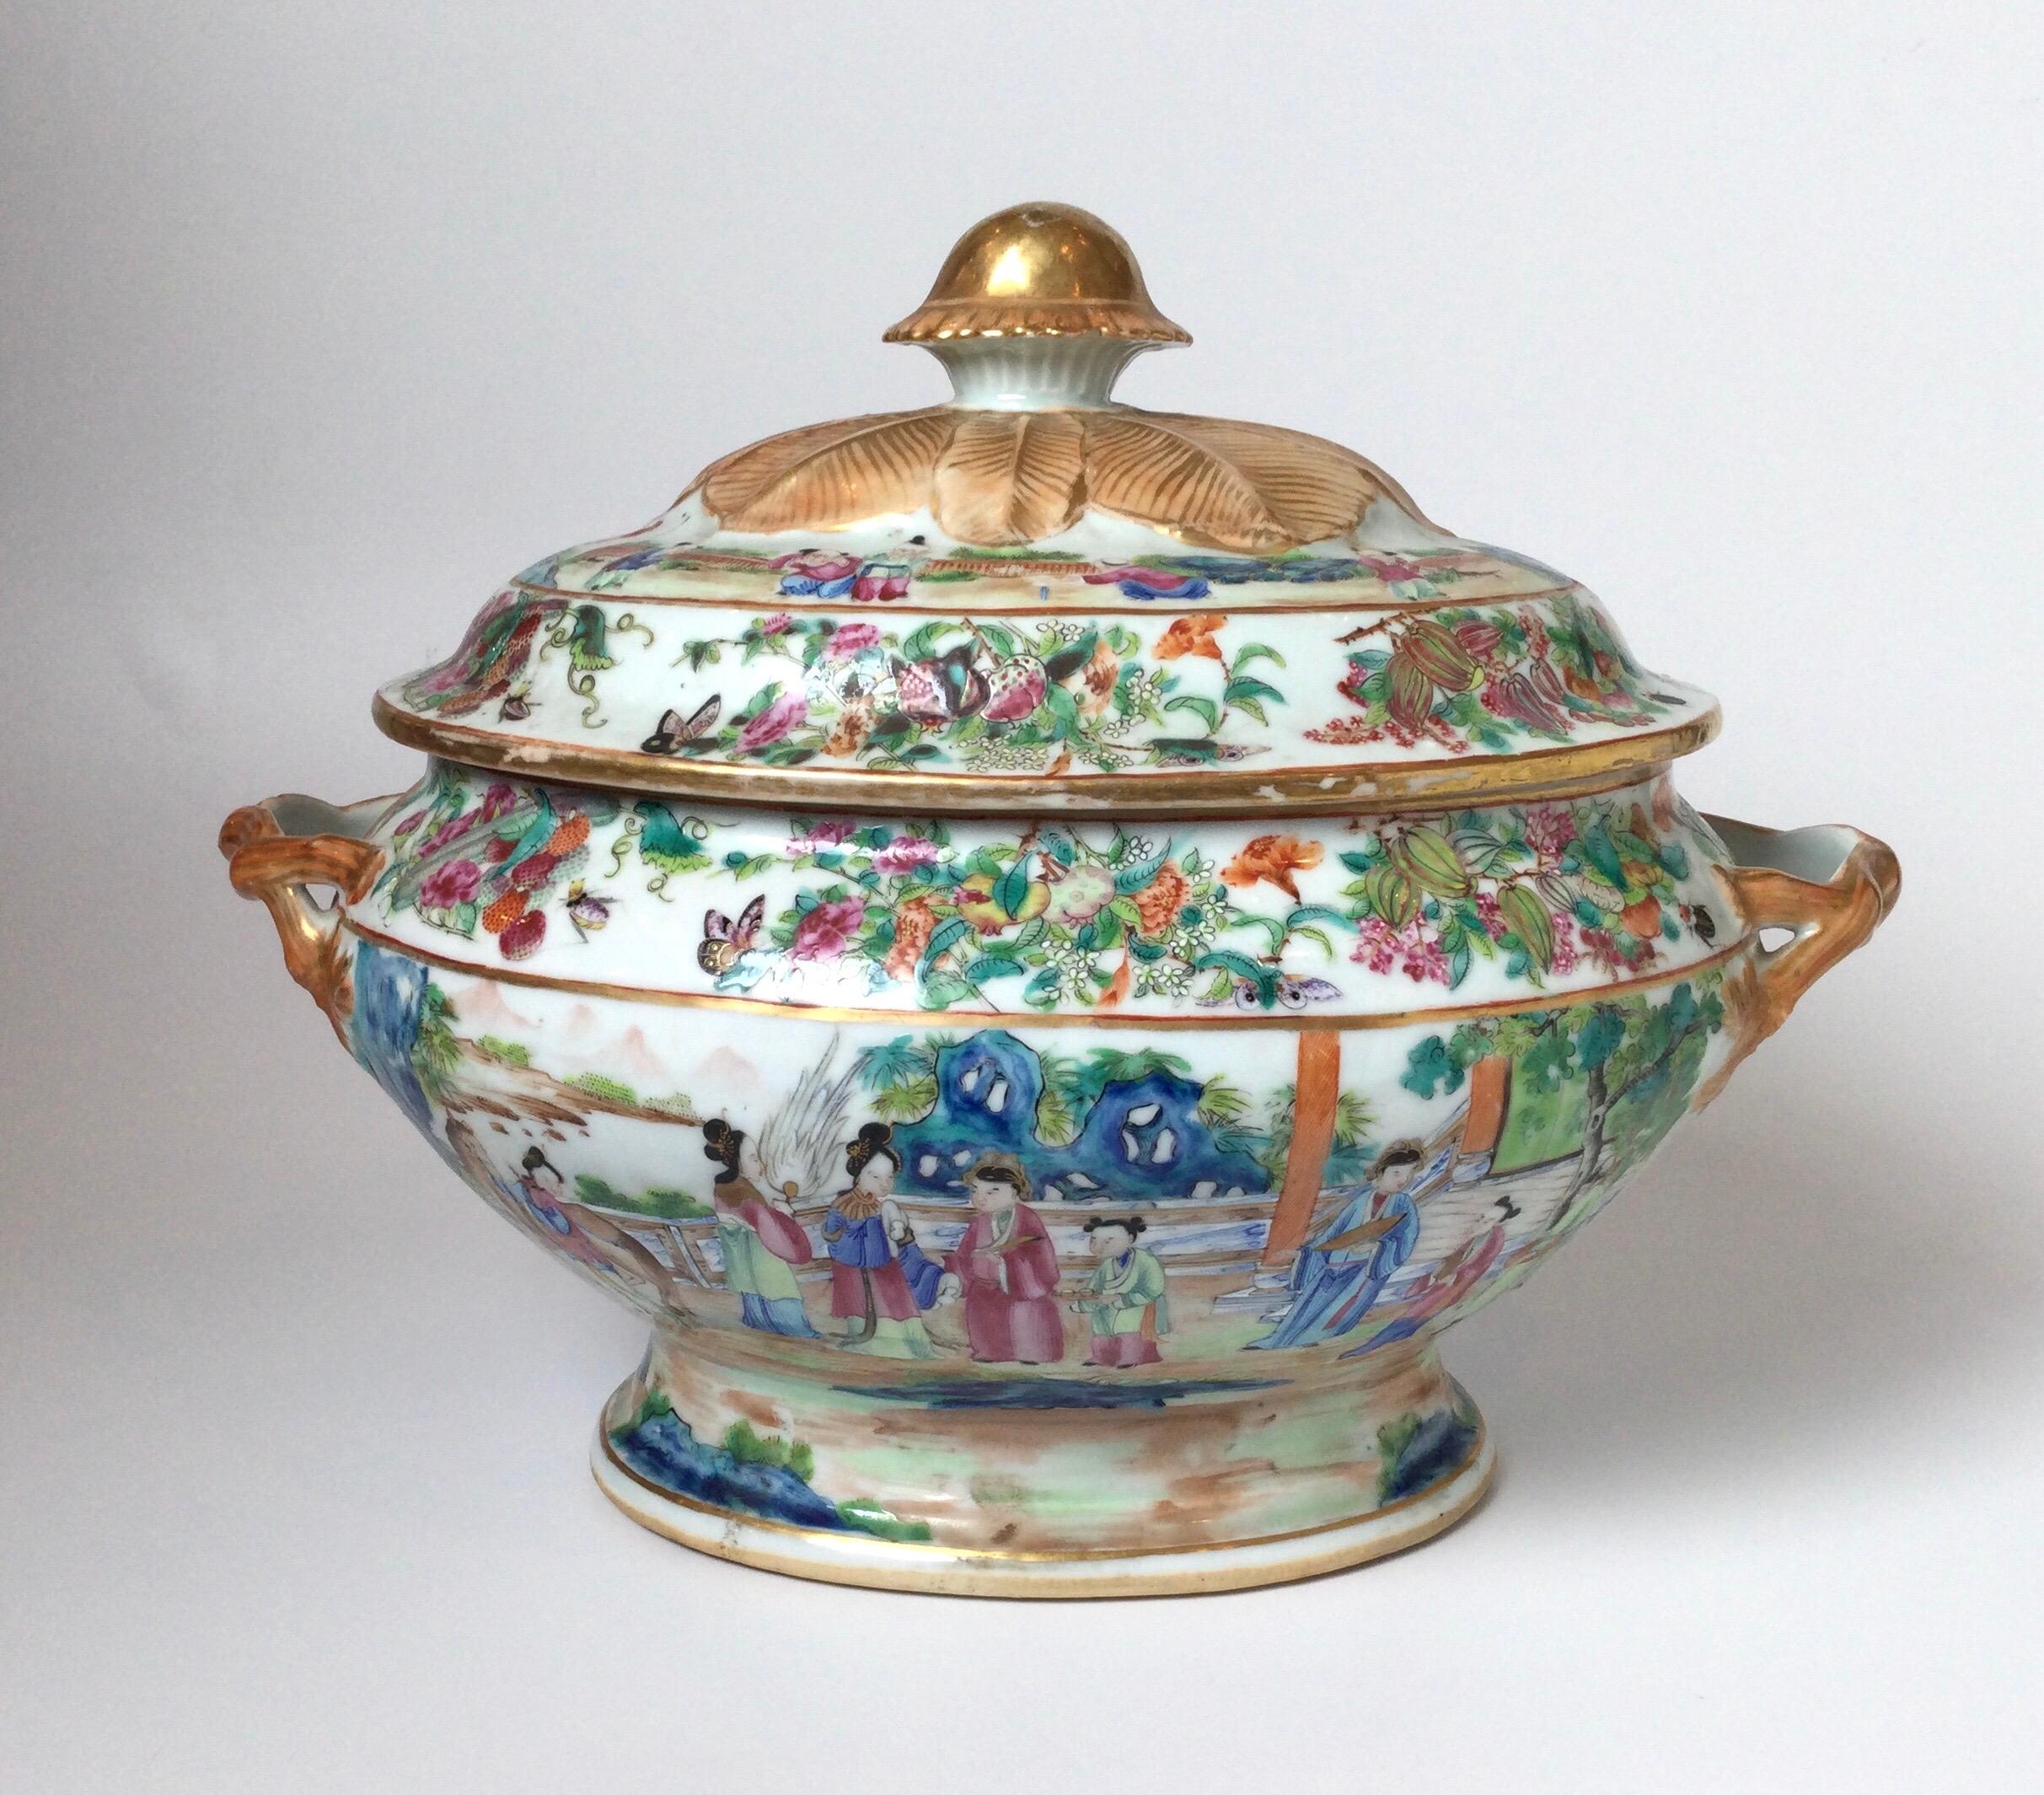 A large rose Mandarin Chinese tureen with lid. The delicate painting all around which is classic fine chines porcelain from the mid 19th century. The lid with a beautifully gilt handle with a burst of hand gilt decoration. The gilt handles in a twig